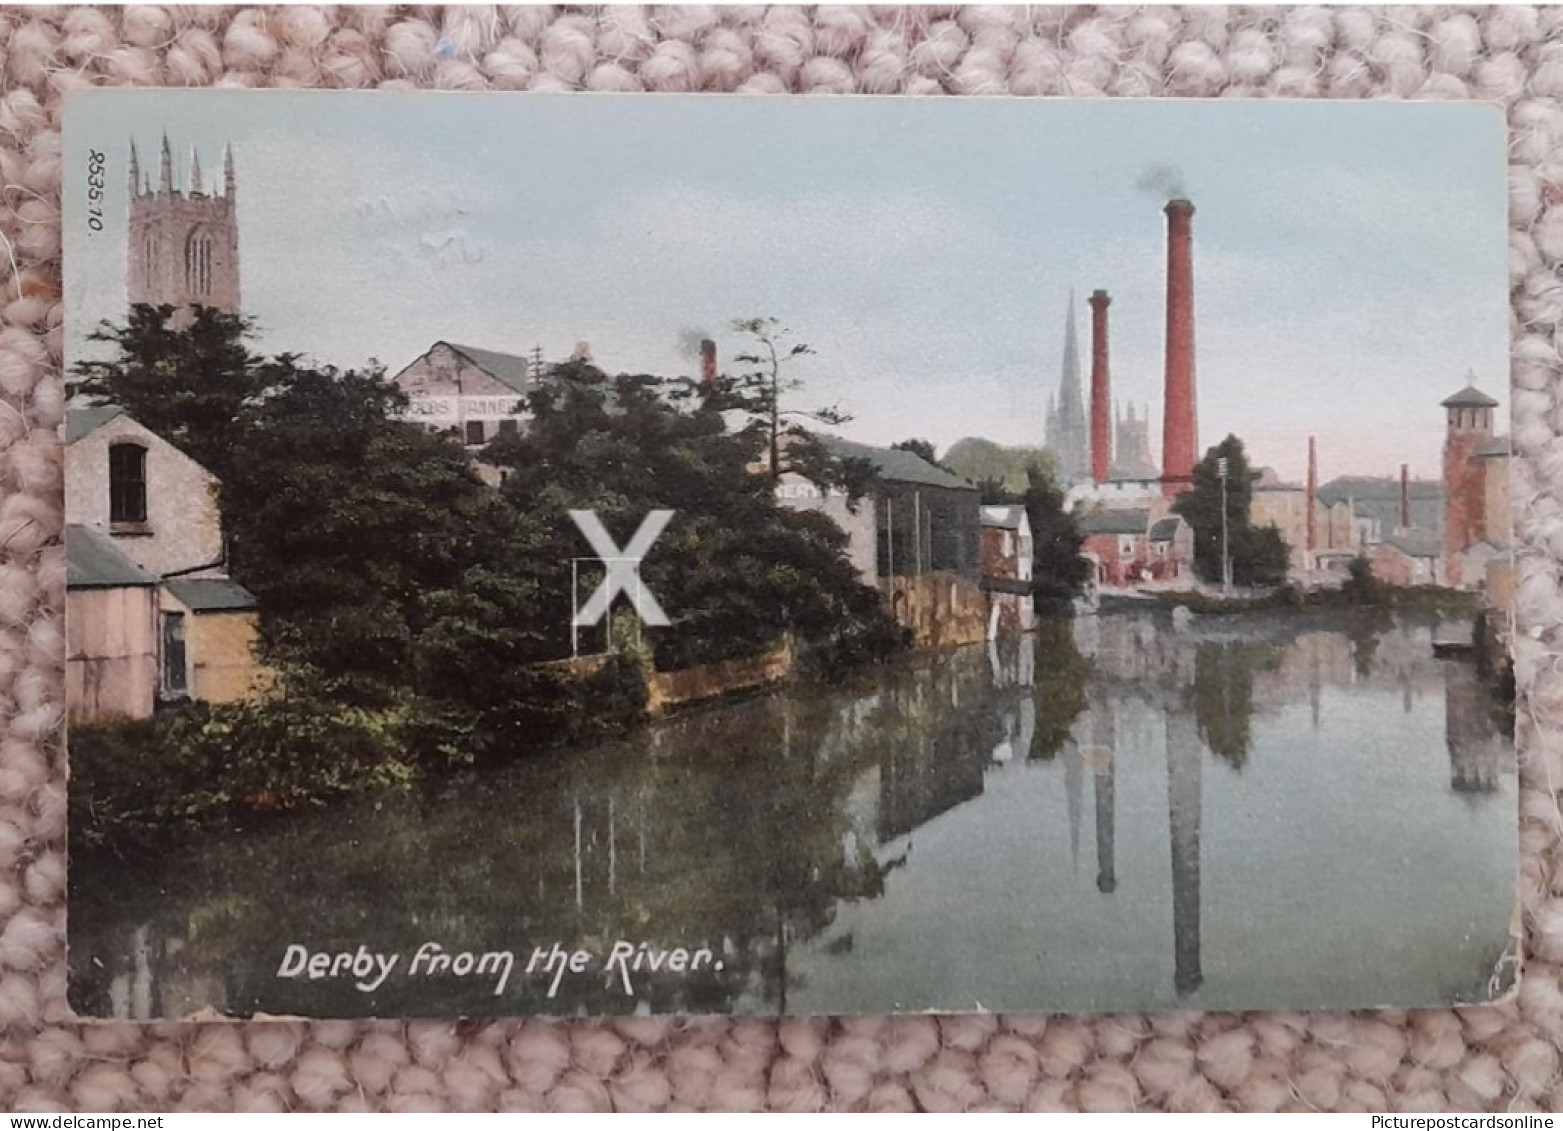 DERBY FROM THE RIVER OLD COLOUR POSTCARD DERBYSHIRE - Derbyshire